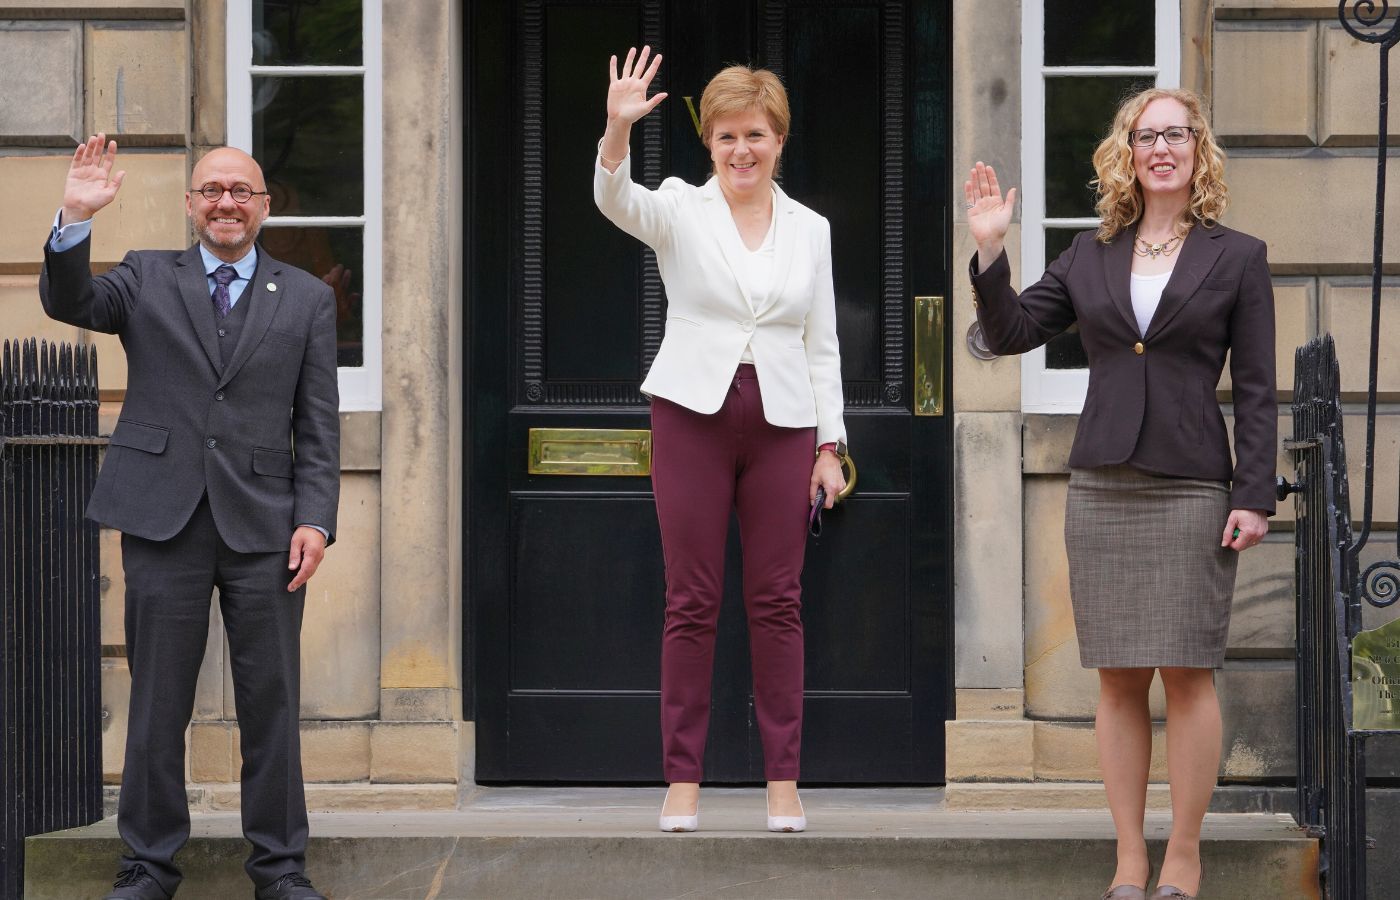 The Bute House Agreement was agreed under Nicola Sturgeon and continued by Humza Yousaf.